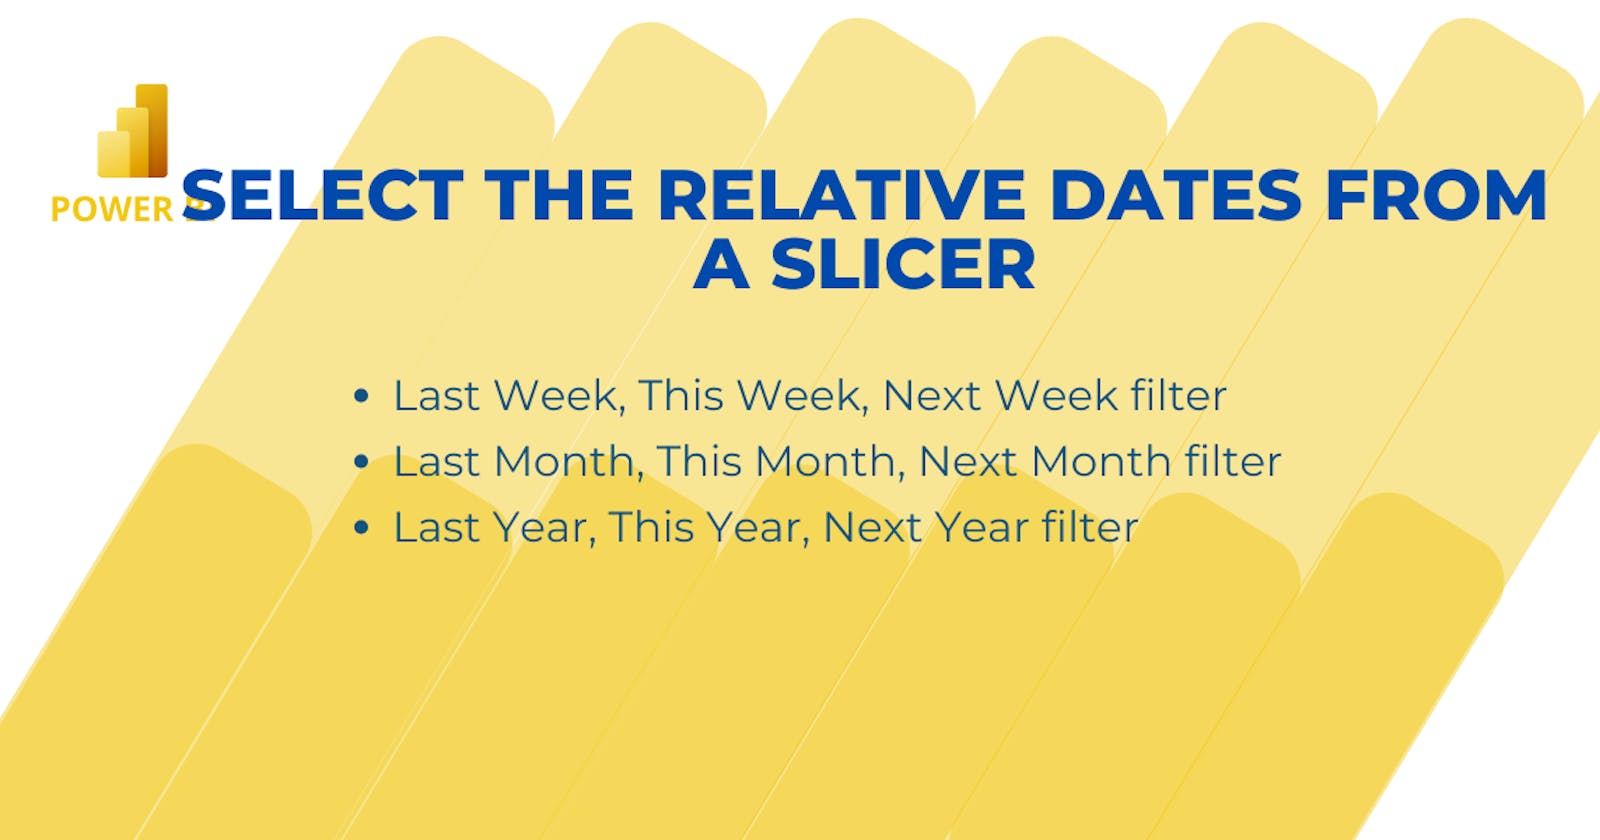 Select the relative dates (weeks, Months, Years) from a slicer.